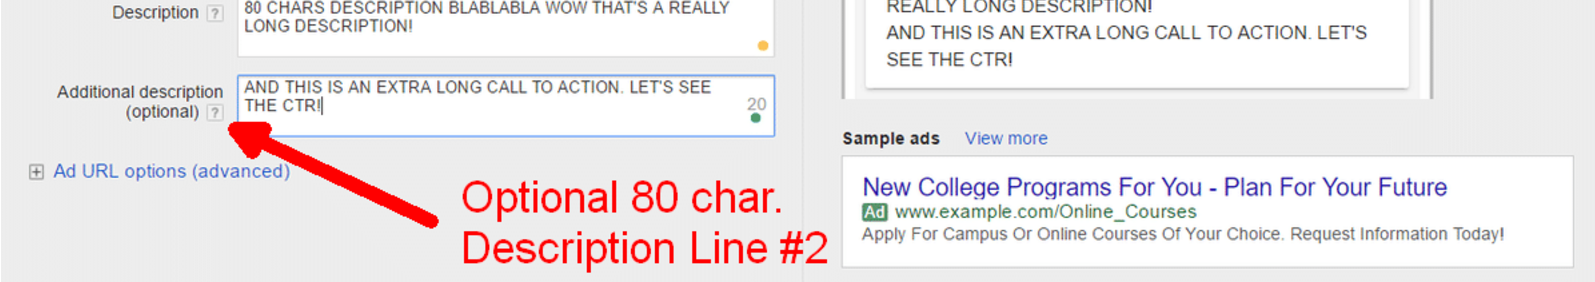 Google AdWords Expanded Text Ad Test